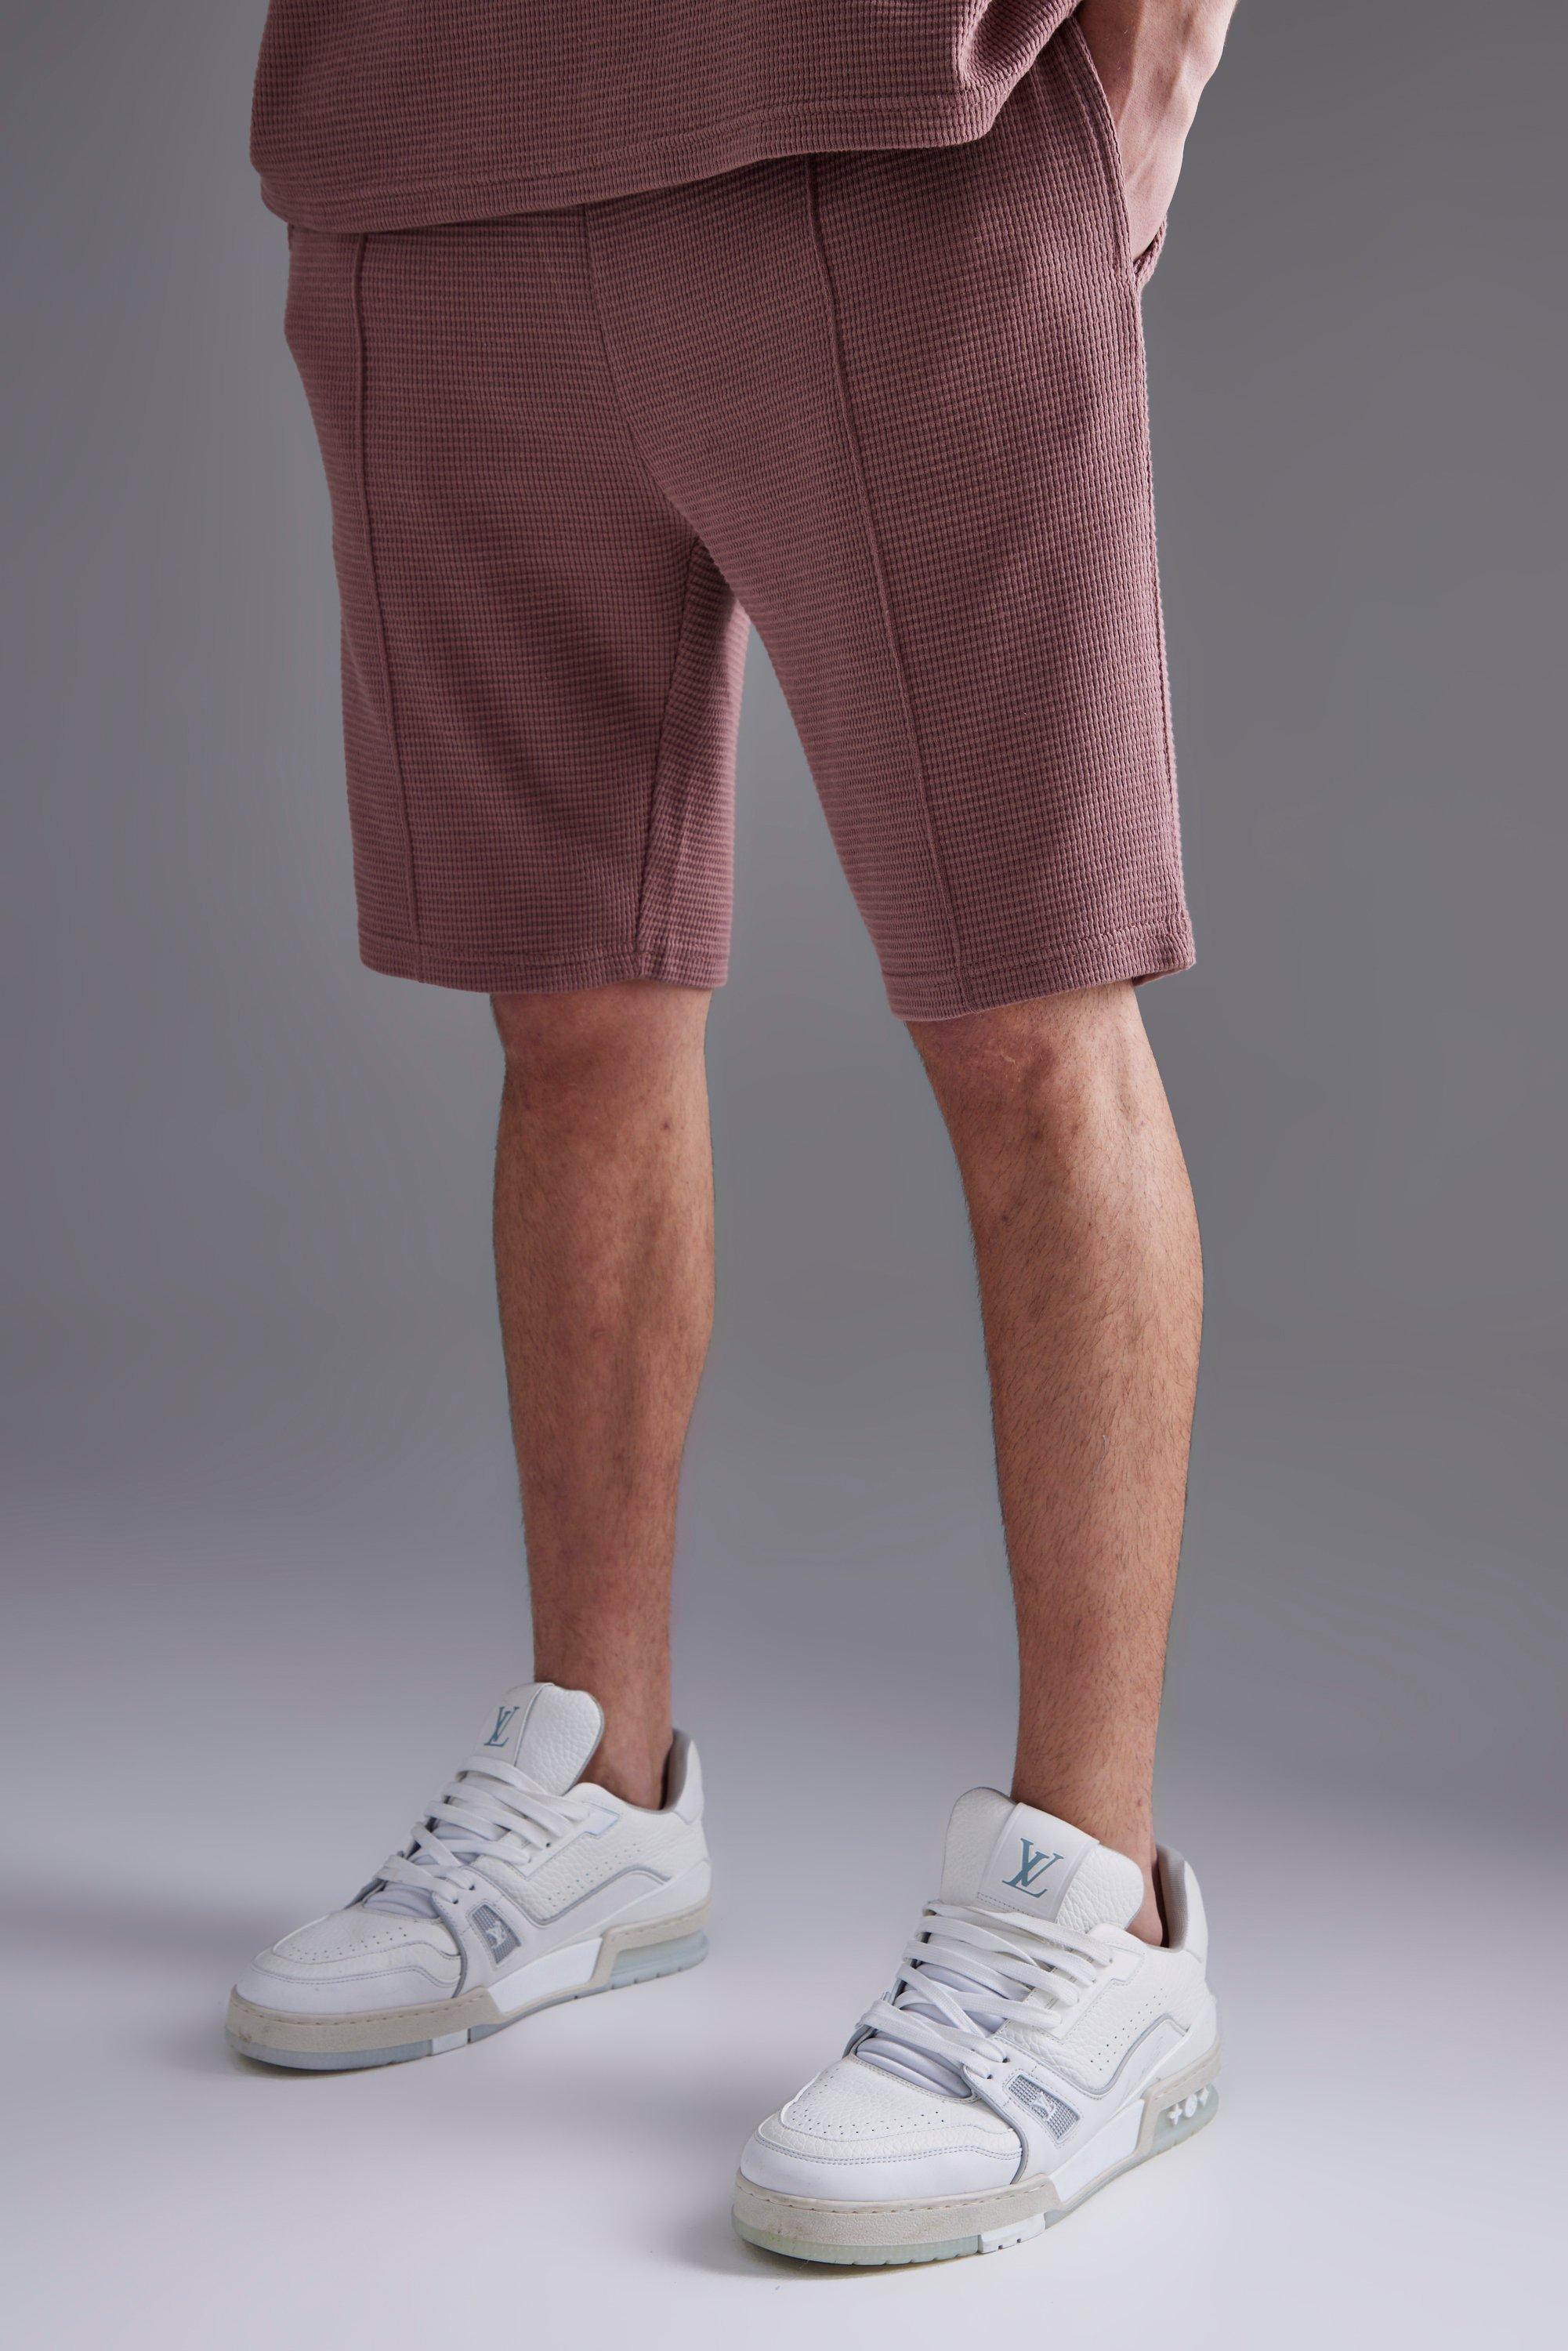 Slim Fit Mid Length Double Knit Short | boohooMAN USA